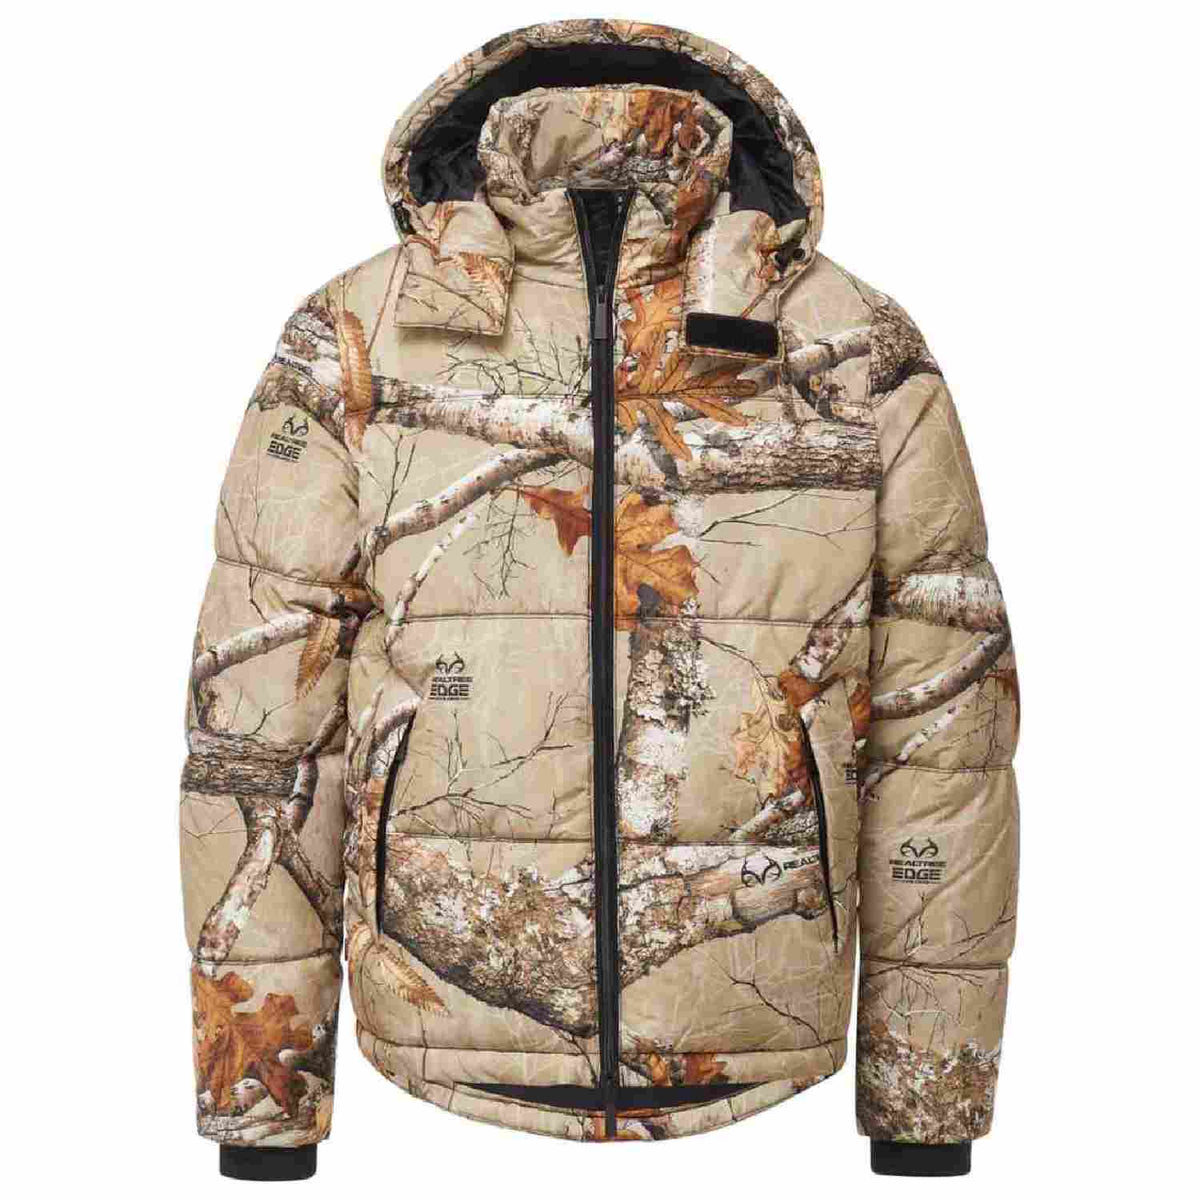 The Very Warm - Desert Poly Filled Puffer Jacket